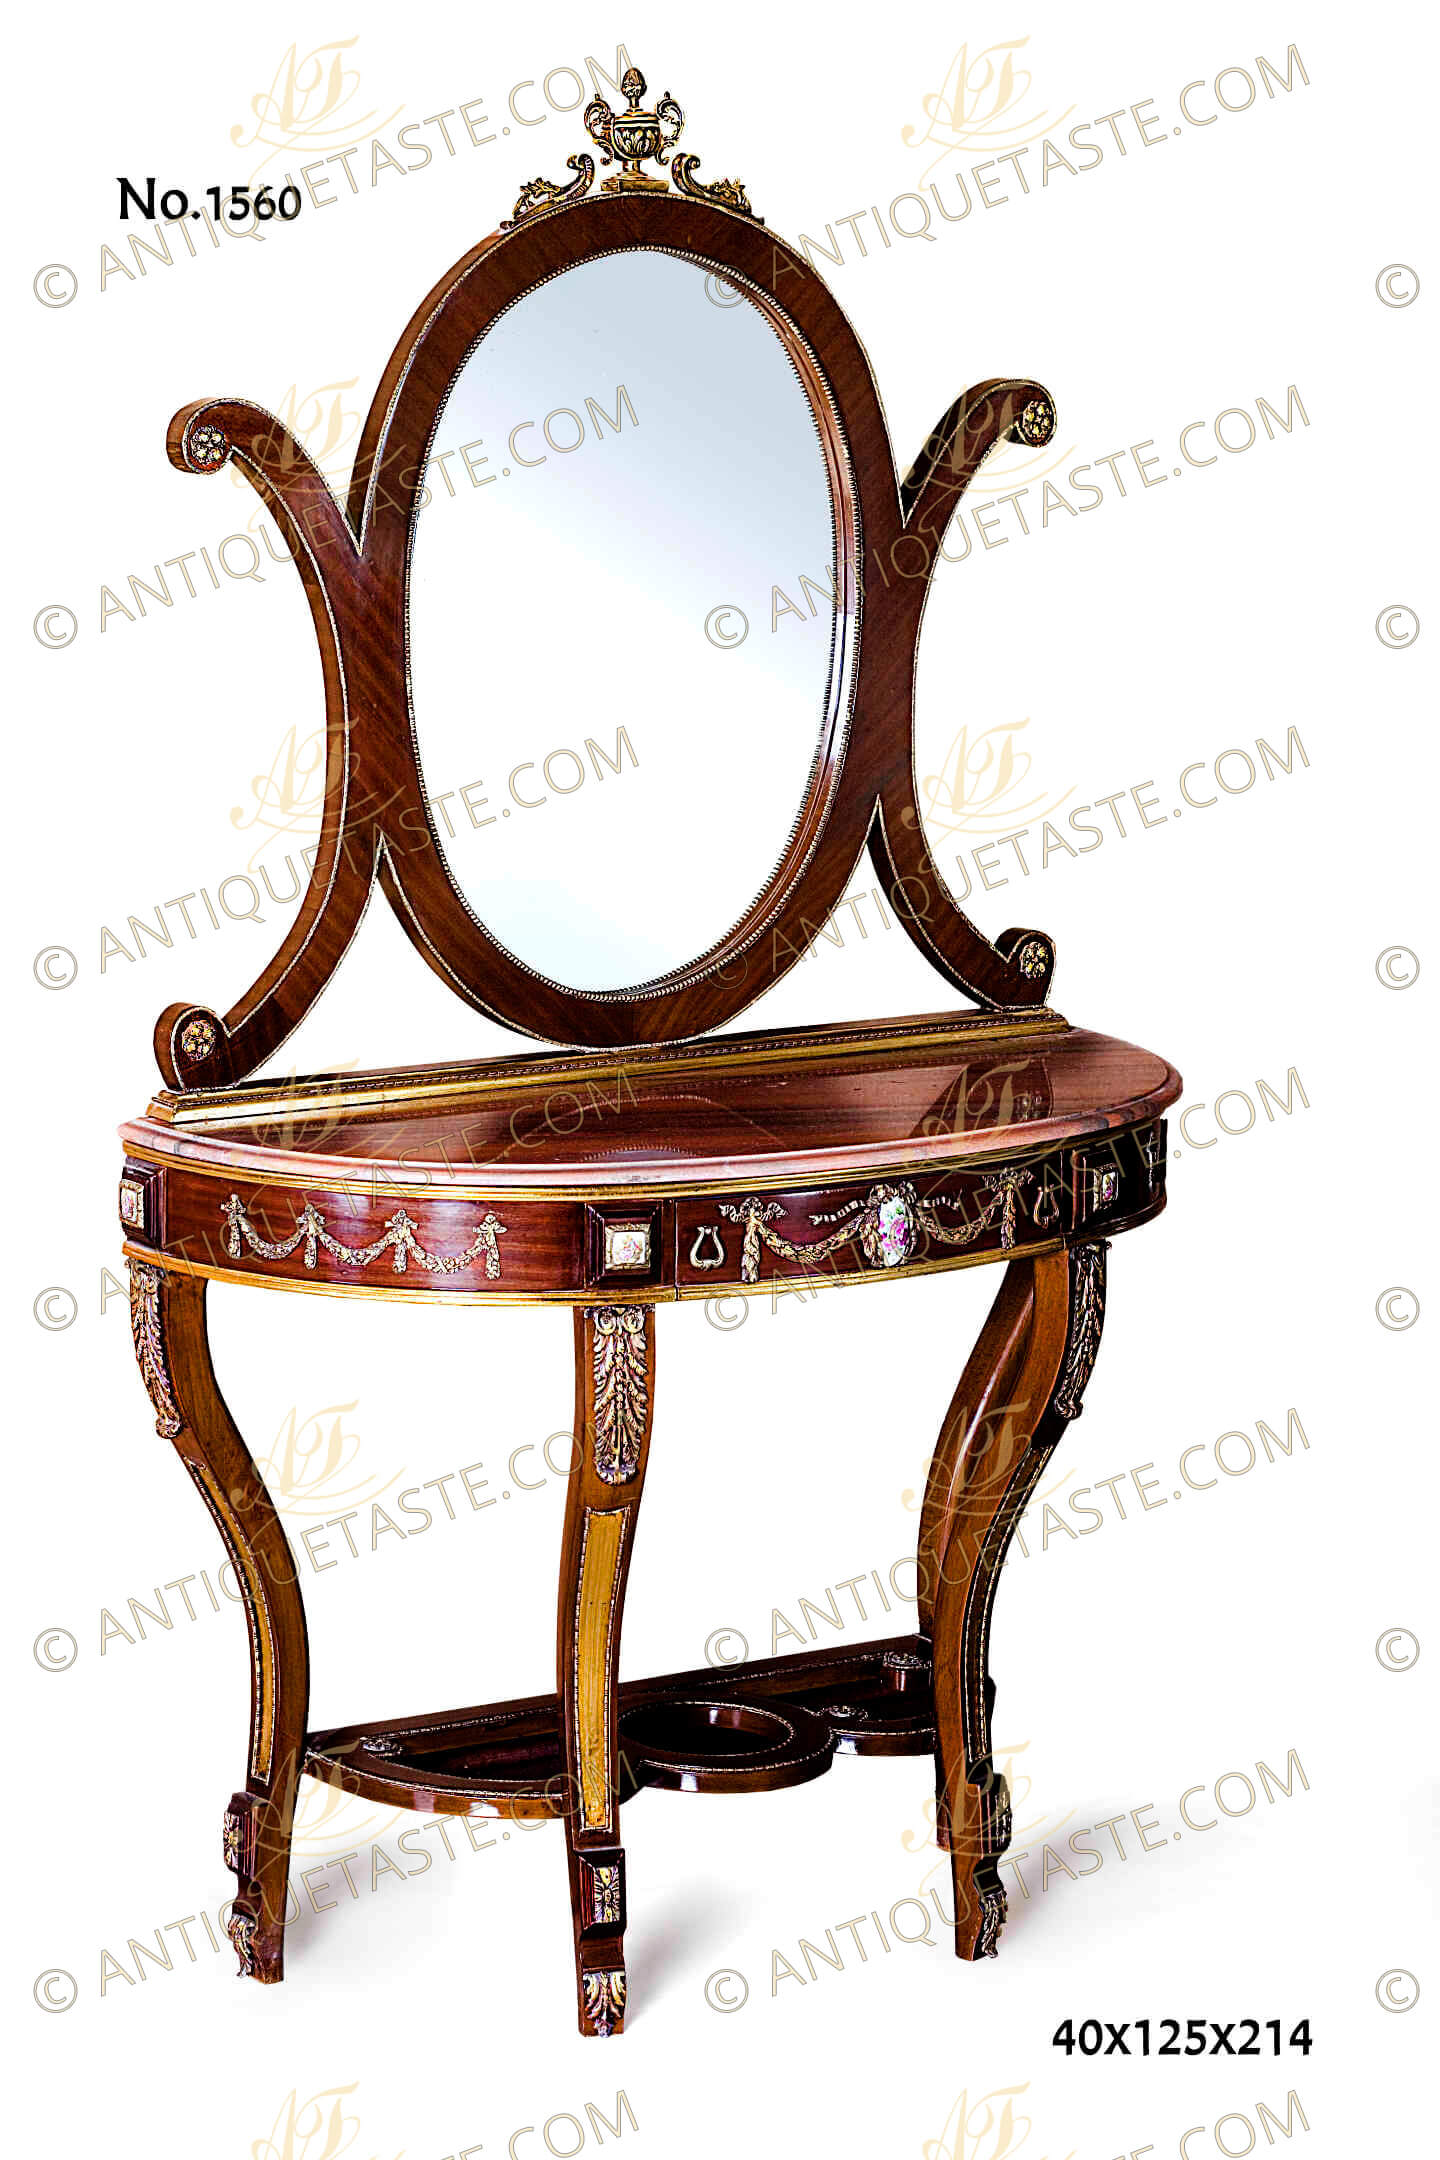 A winsome French Napoleon style ormolu-mounted veneer inlaid mirrored console table with porcelain plaques, The veneer inlaid oval shaped mirror flanked with C shaped sides ornamented with ormolu rosettes, The mirror crested with a fine chiseled ormolu urn flanked with foliate ormolu volutes to each side, all bordered with ormolu band, The mirror is resting on a rectangular gilded and beaded base above the demilune shaped beveled marble top which takes the same shape of the console table frieze, The demilune shaped apron has a central drawer separated from the two curved sides with two blocks inlaid with porcelain plaques bordered with ormolu strips and repeated to the far end of the apron, The central drawer has a central porcelain plaque encircled within a fine chiseled ormolu band issuing swaging laurel tied ribbons and two ormolu lyre shaped handles. The curved sides have the same ormolu ornaments, The console is raised on four cabriole legs headed by an intricate acanthus leave ormolu mount on each above a gilded ormolu bordered body surmounting a block ornamented with an ormolu rosette above an ormolu acanthus sabot, The four legs are connected with an elaborate circles shaped stretcher with ormolu beaded trim and ormolu rosettes